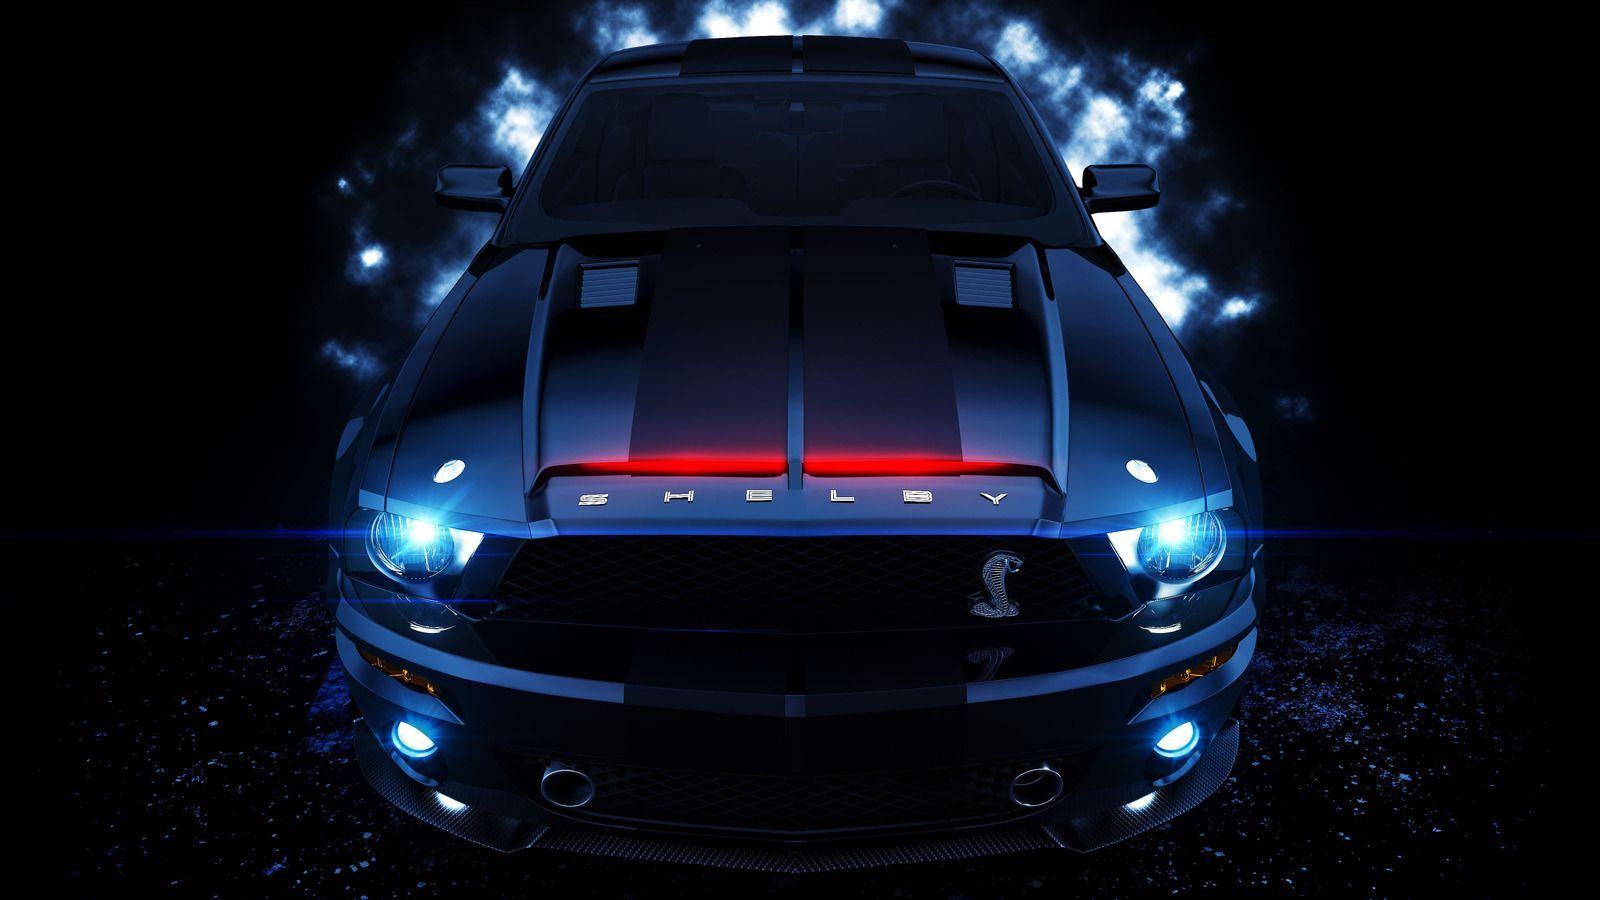 Blue Ford Mustang Shelby GT500 Car Picture HD Wallpaper. ad